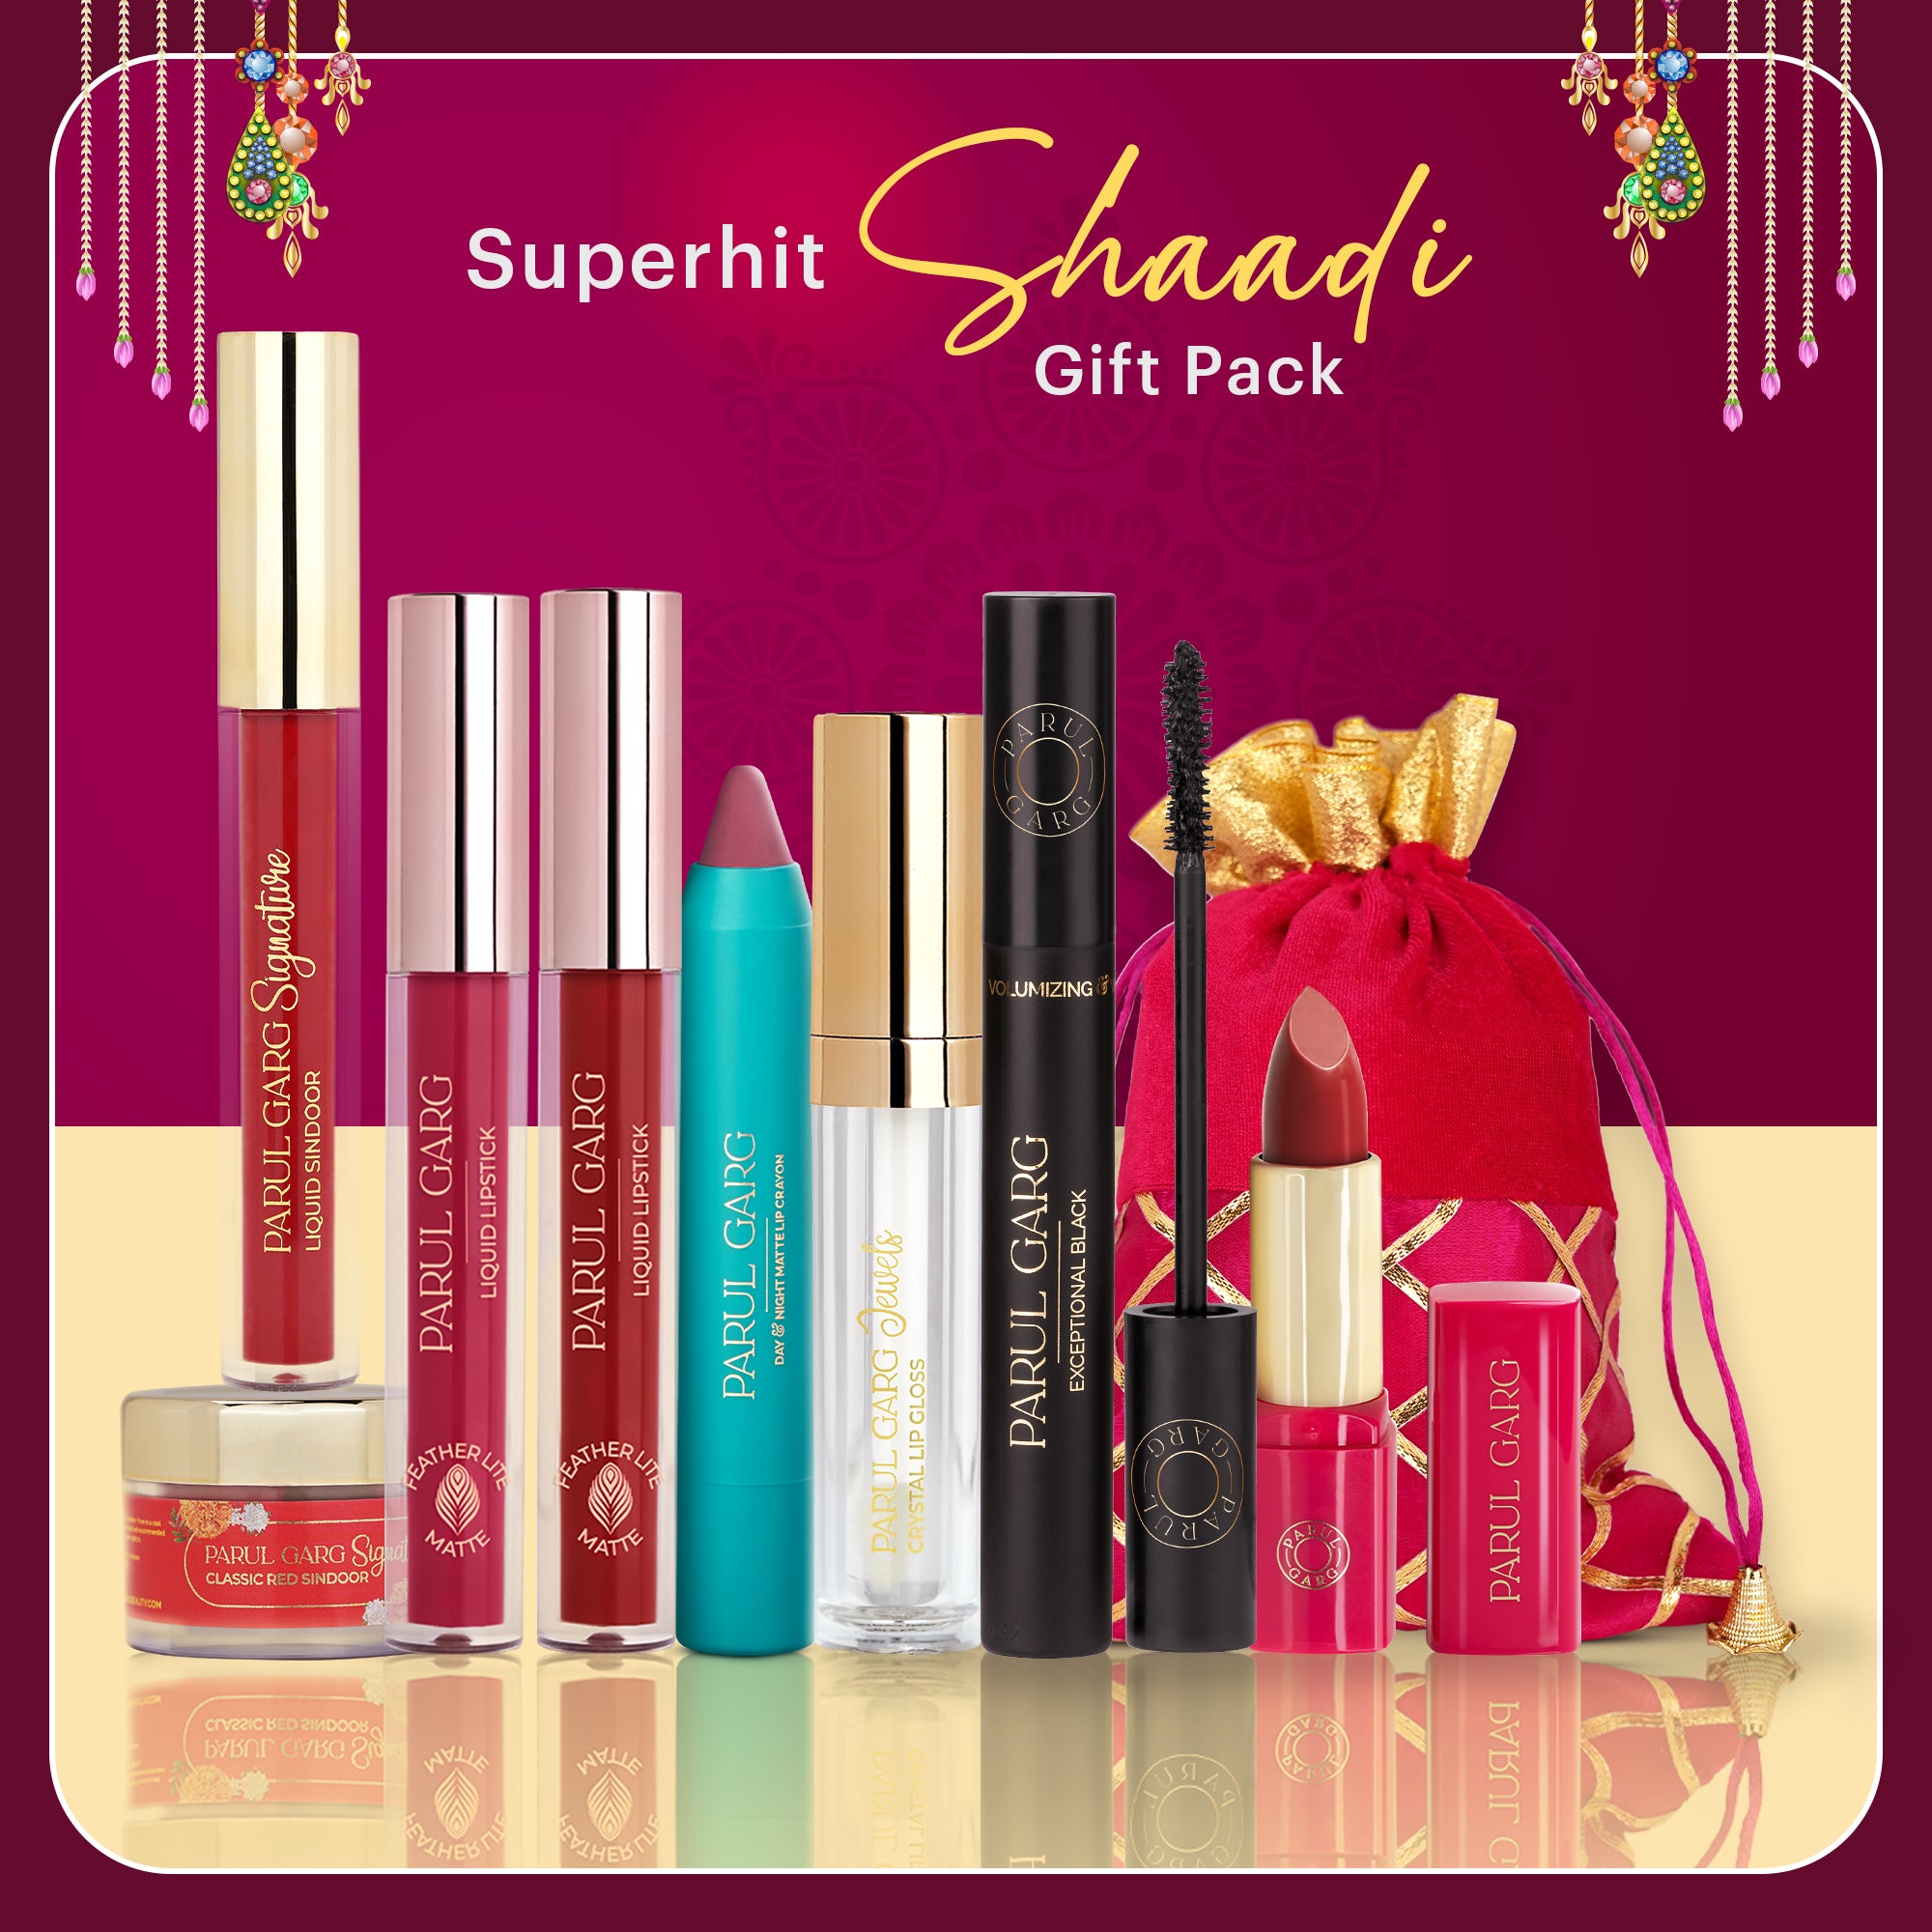 Super Hit Shaadi Gift Pack : Limited Edition